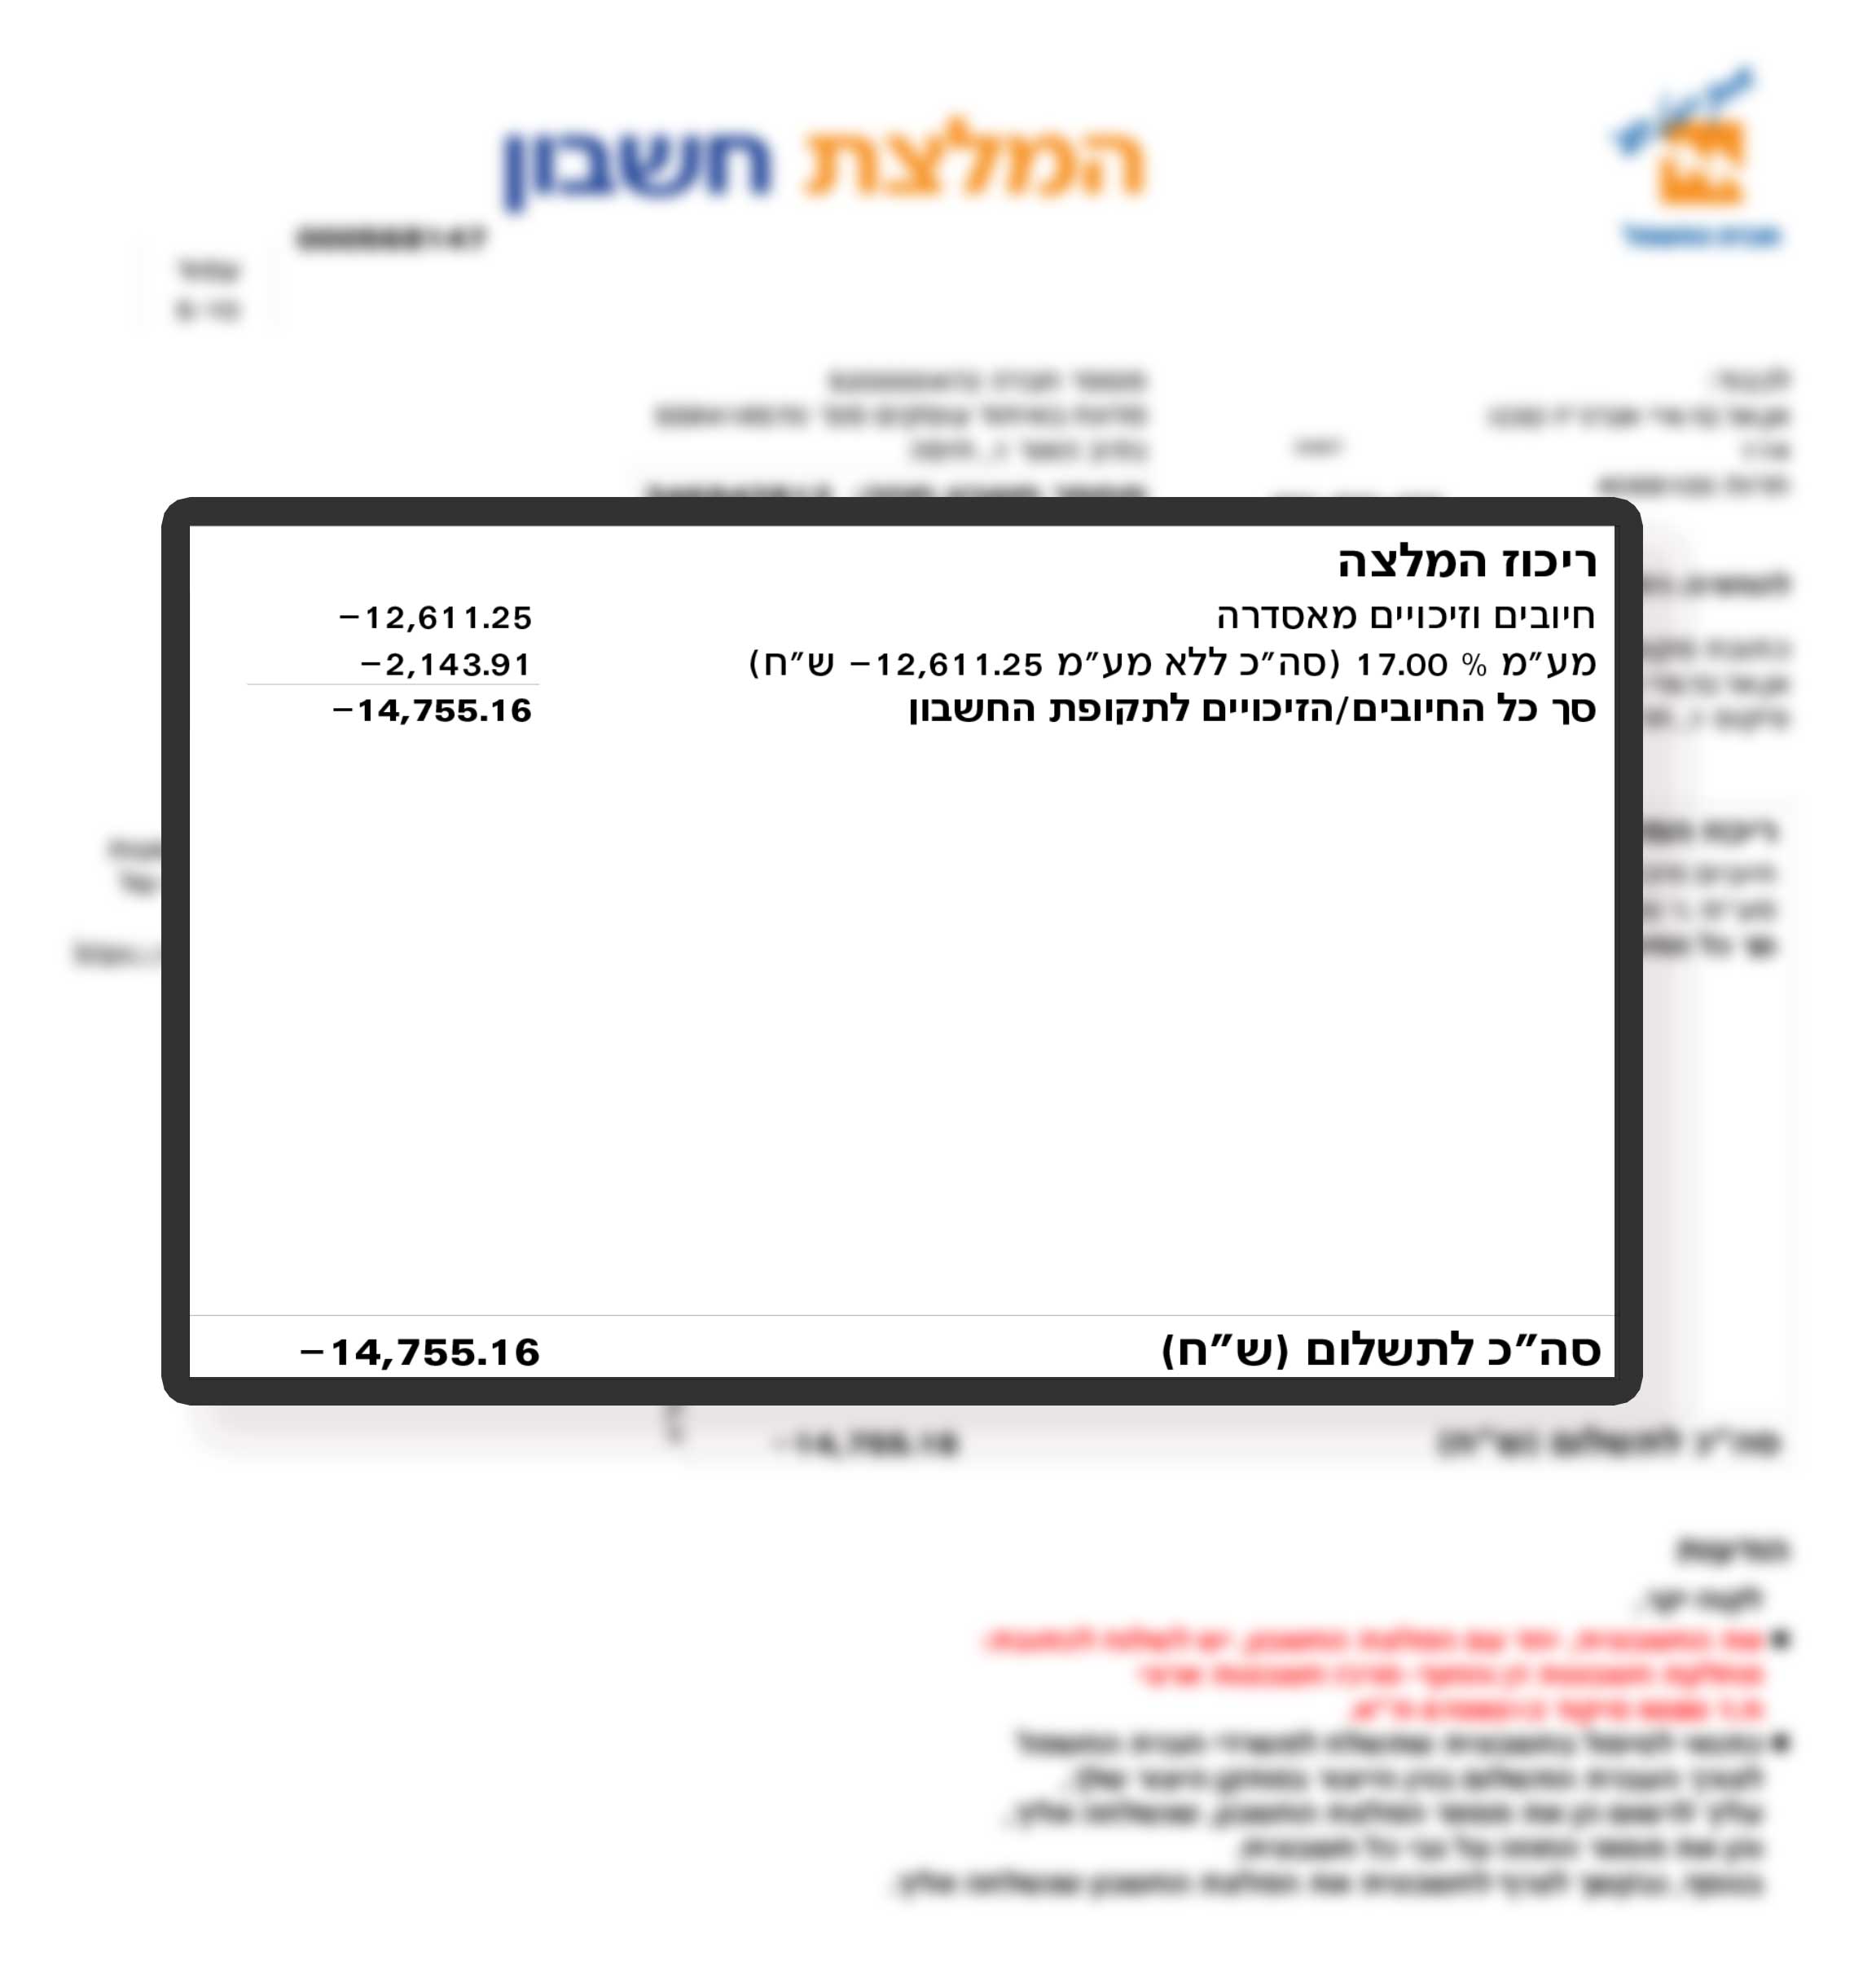 Itzhak from Hasharon district earned NIS 14,755 from the electric company in July, 2022